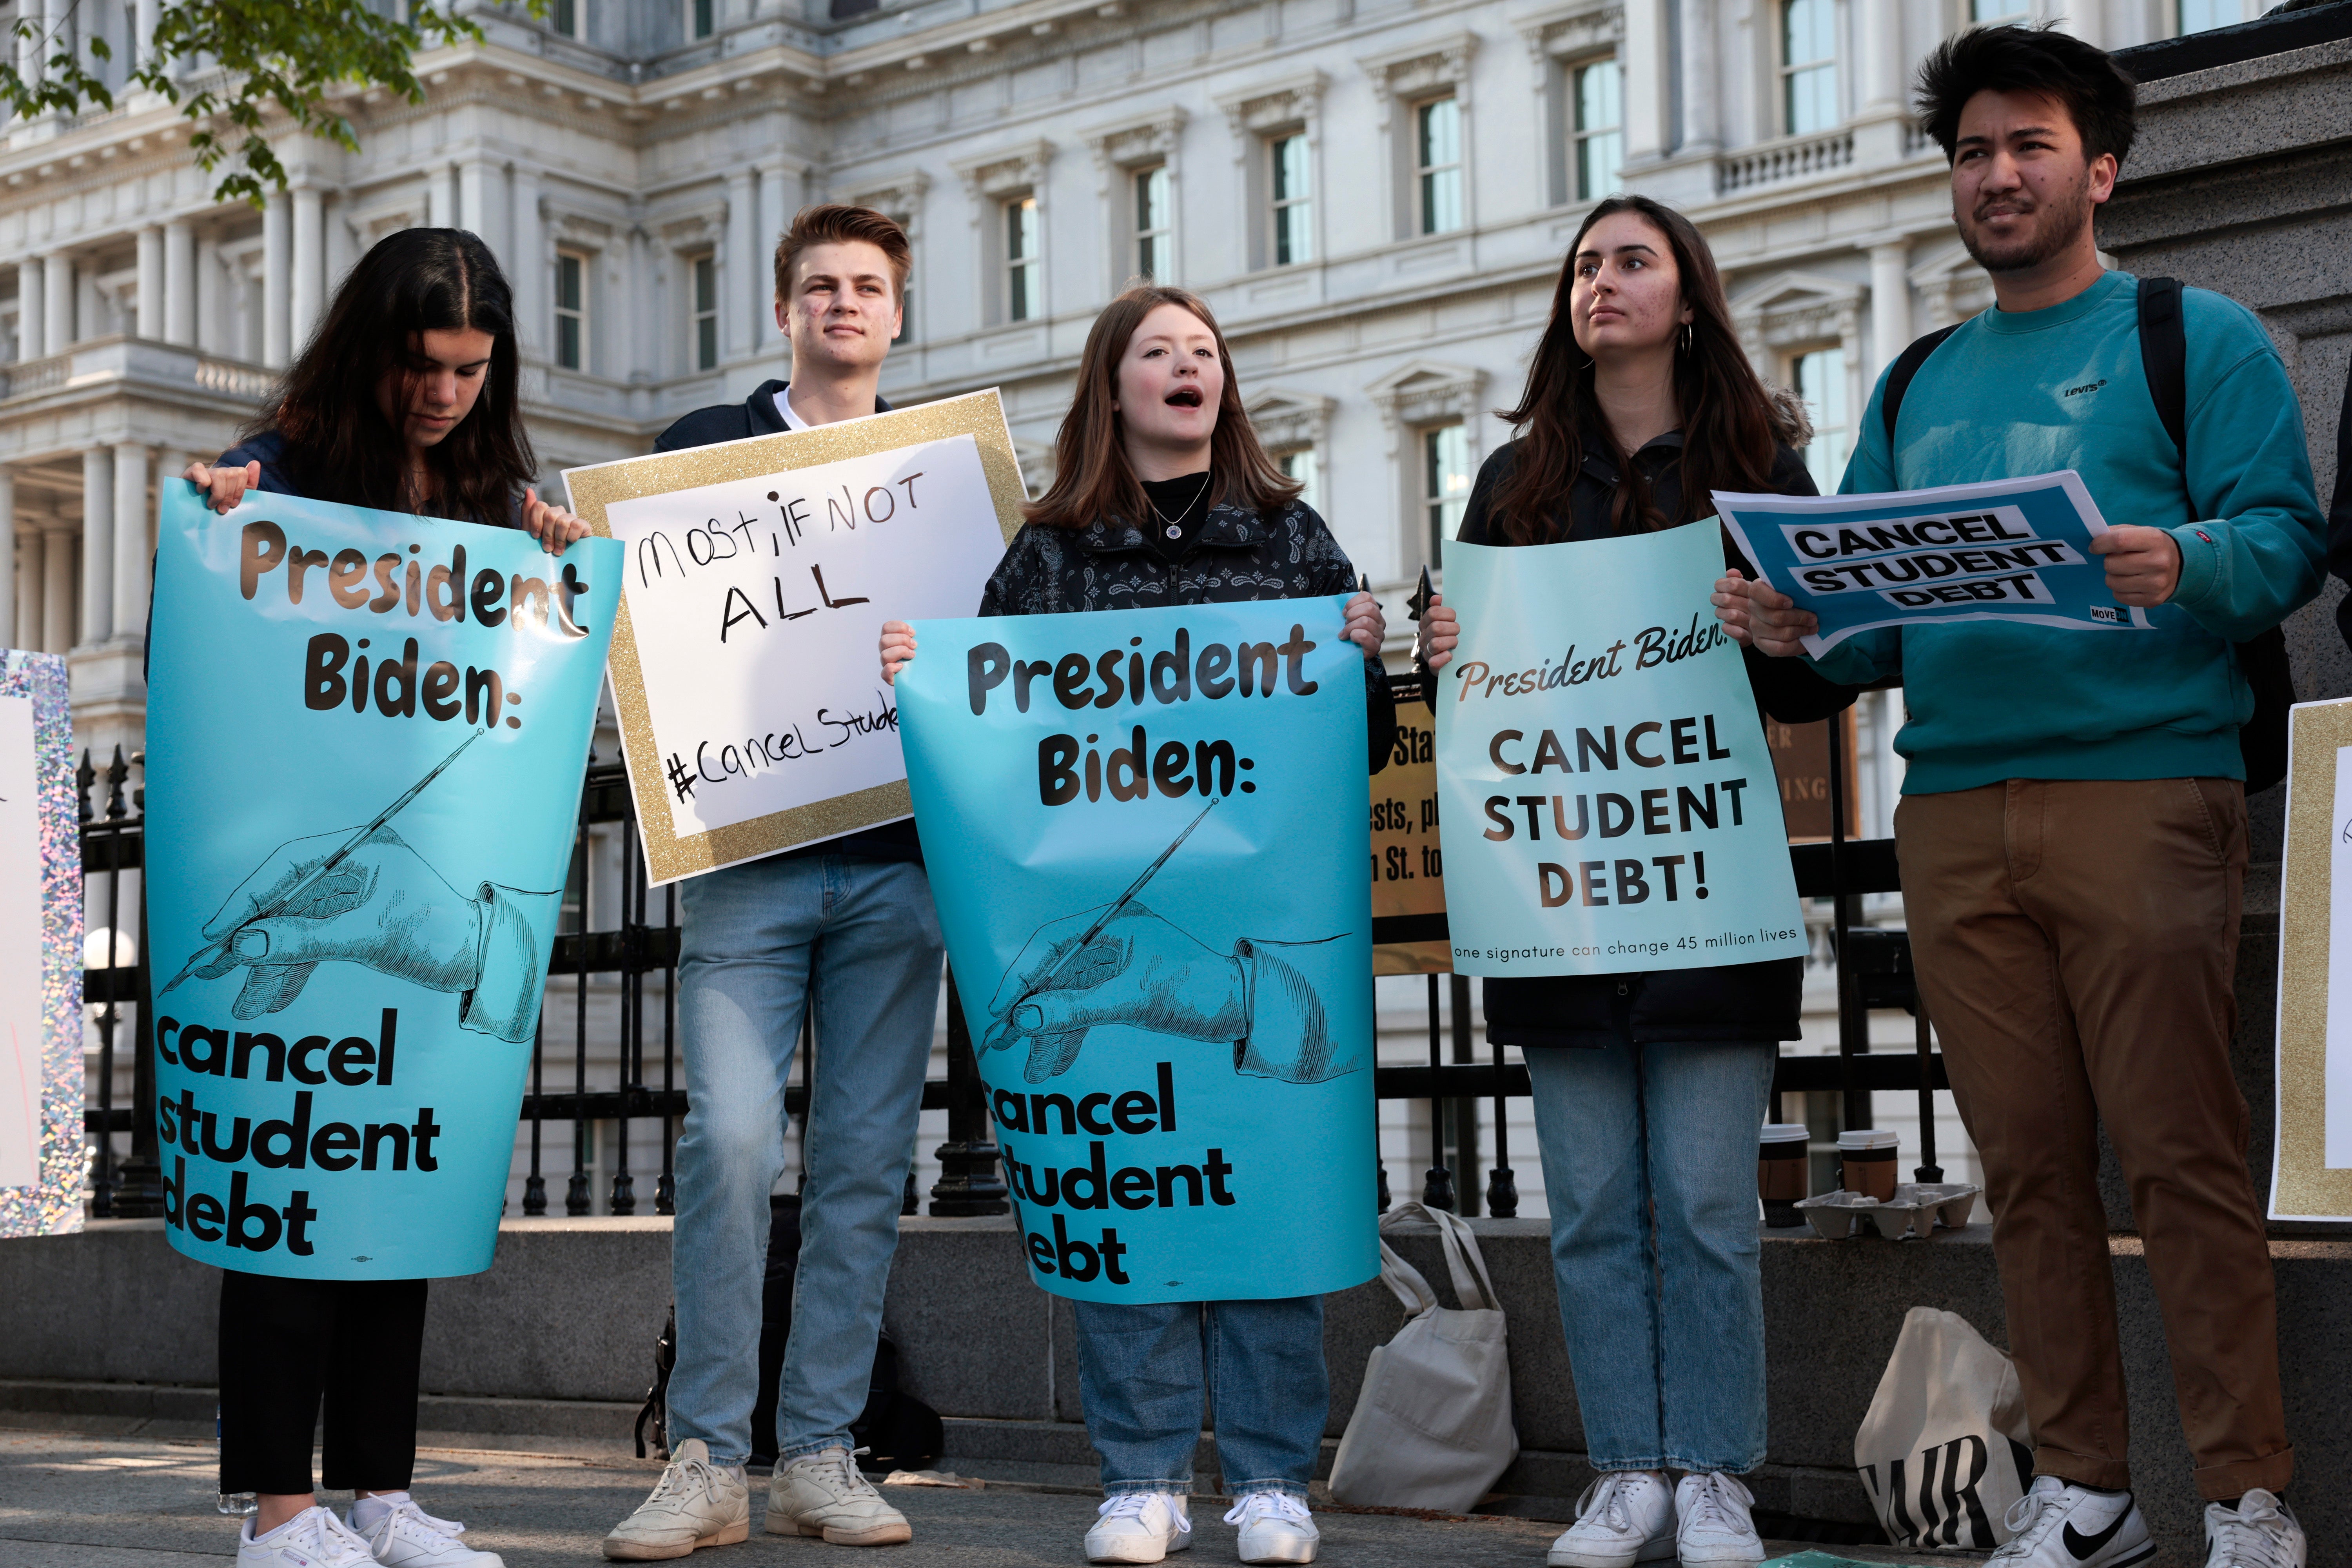 Student loan debt relief advocates rally outside the White House in April 2022.